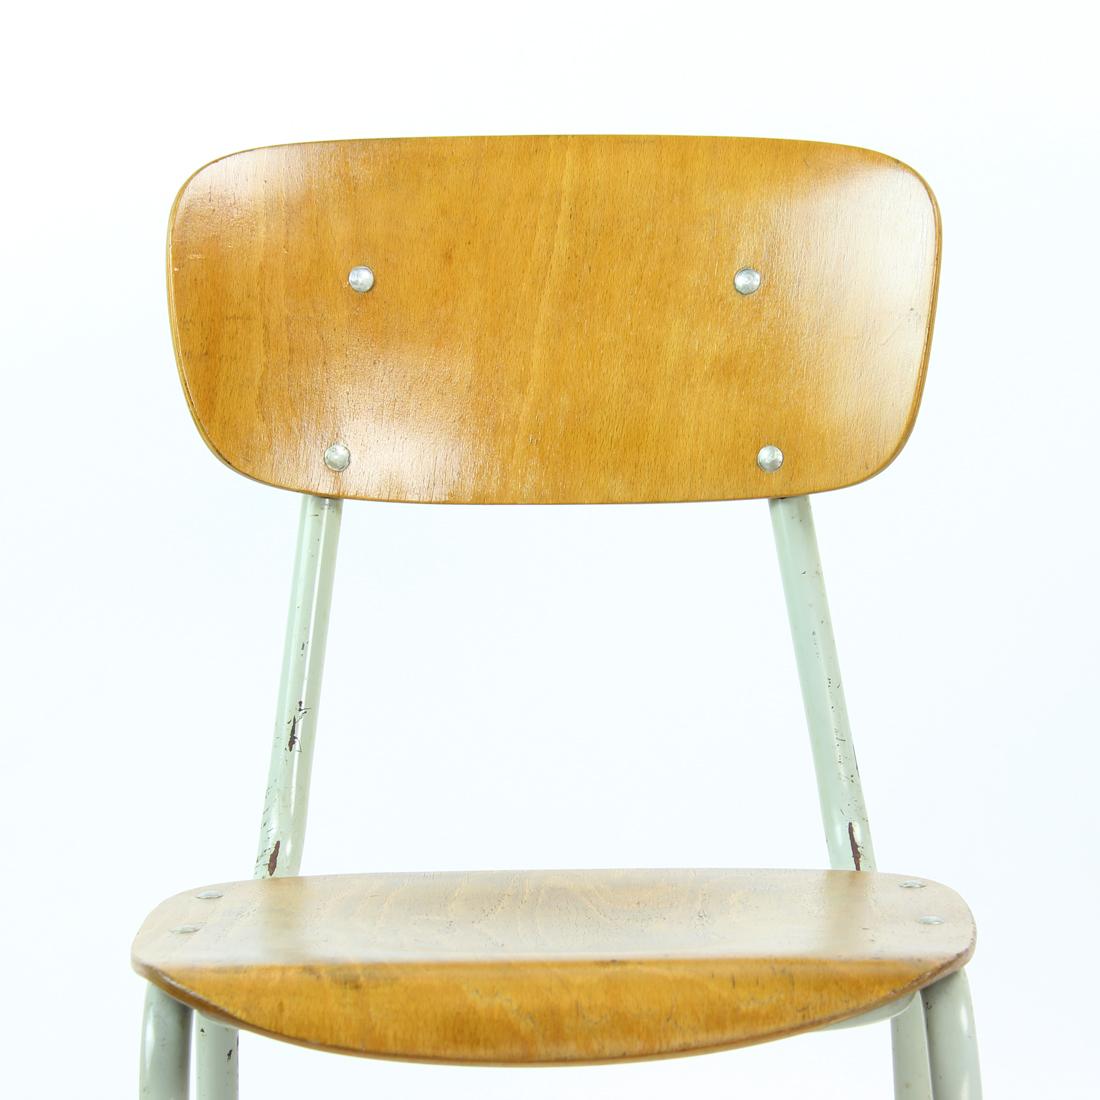 Great vintage find with a lot of history. This school chair was mass produced for schoold in Czechoslovakia in 1960y and has been in use until 90s. The construction is made of bent steel tubes in gry color. The seat and backrest are made of bent